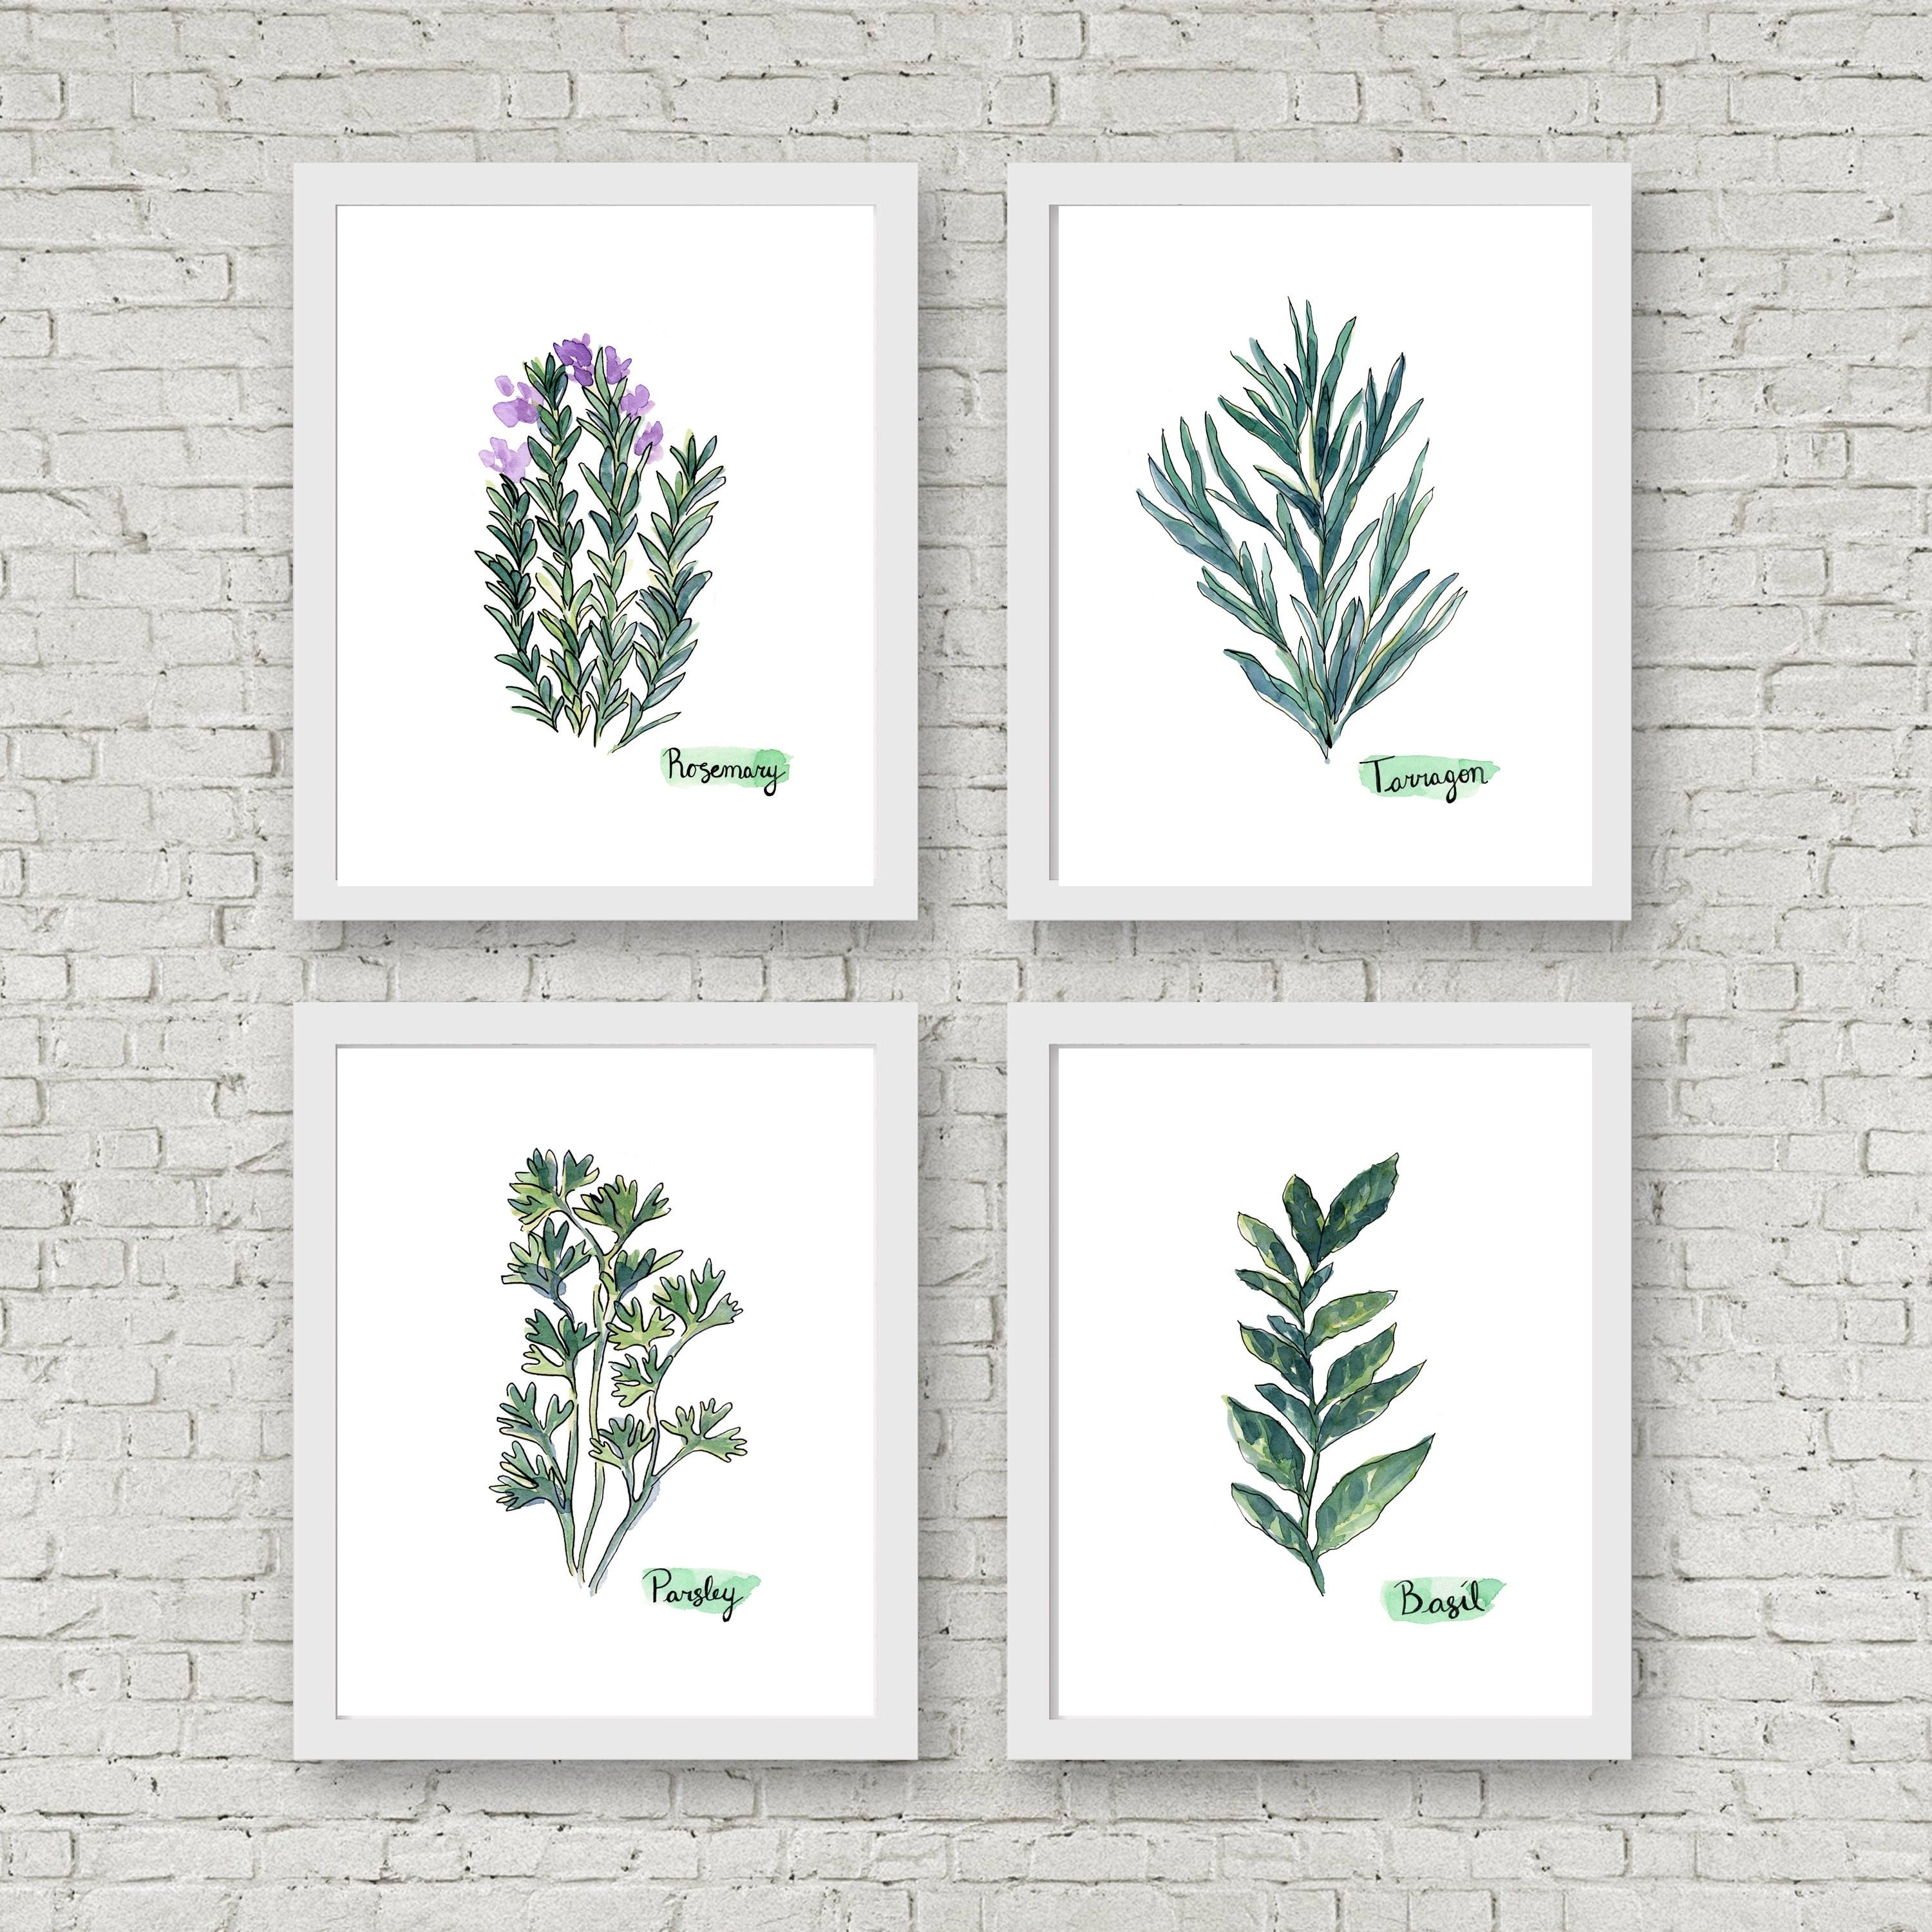 Watercolor Herb Print Set Of 4 Watercolor Green Botanical Prints Pertaining To Herb Wall Art (View 10 of 20)